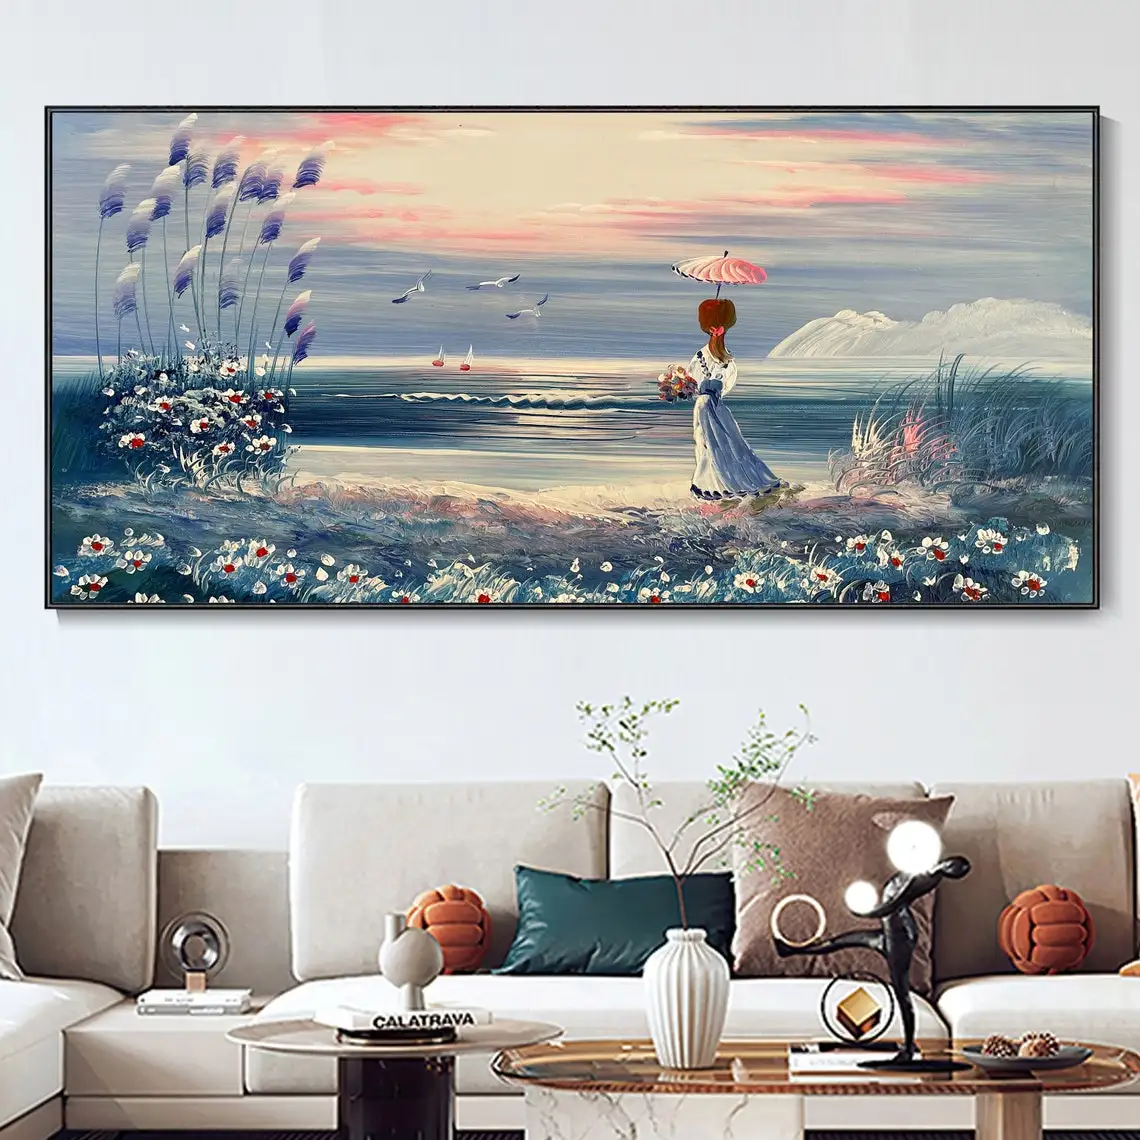 Large Colorful Cloud Canvas Hand Painted Oil Painting Pretty Maiden Seagull  Yellow Sunrise Thick Texture Sea Landscape Wall Art